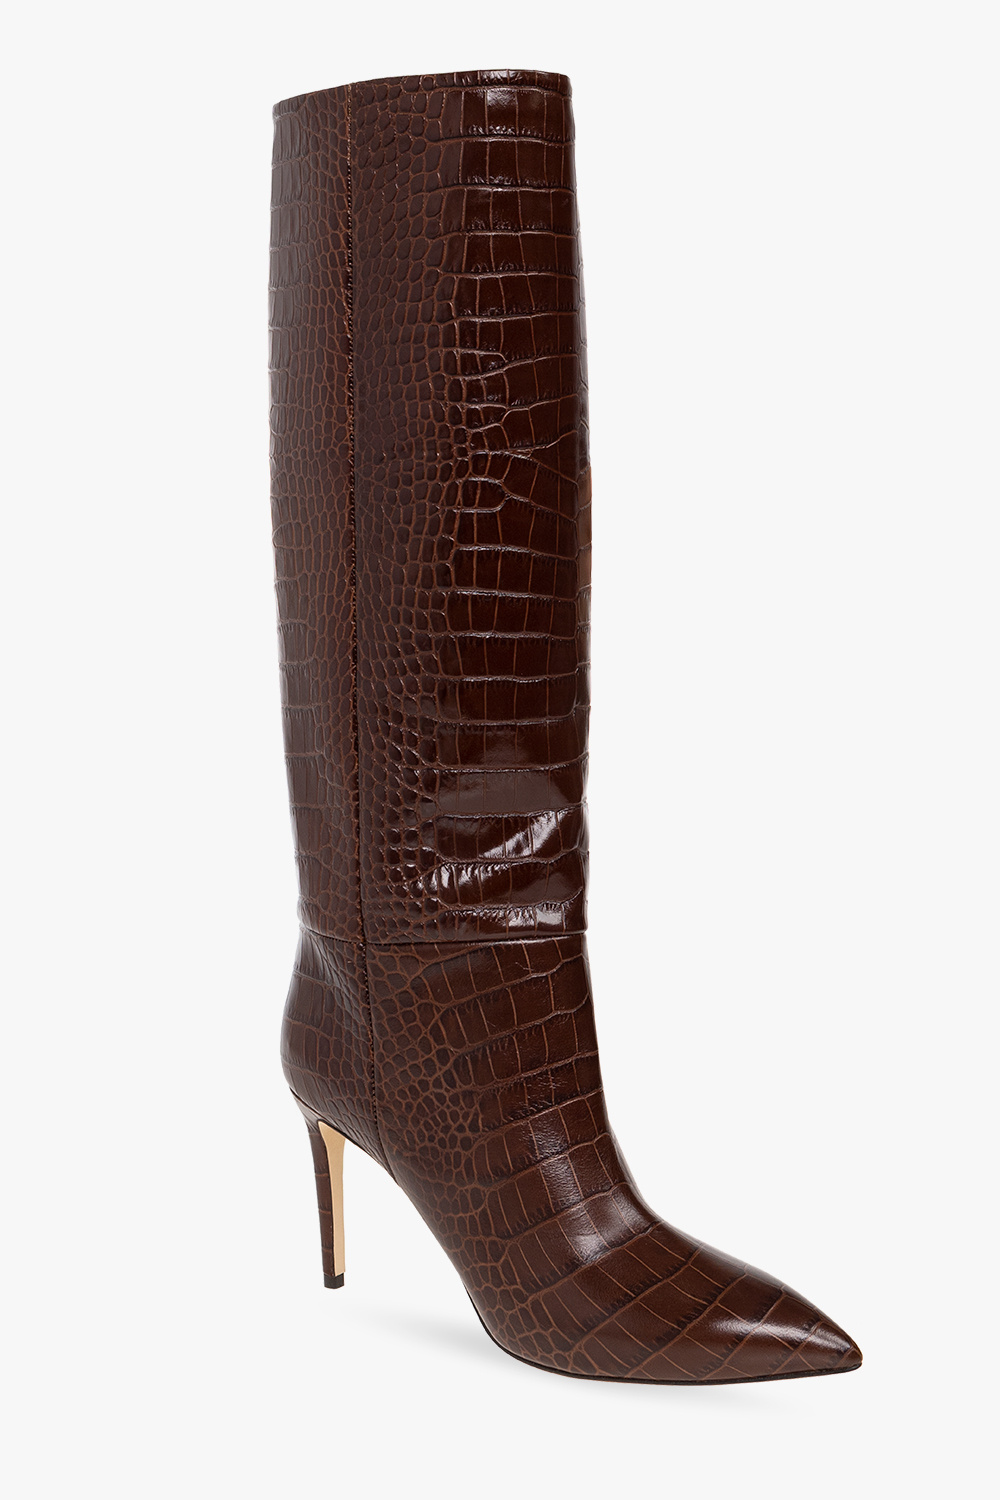 Paris Texas Leather heeled knee-high boots